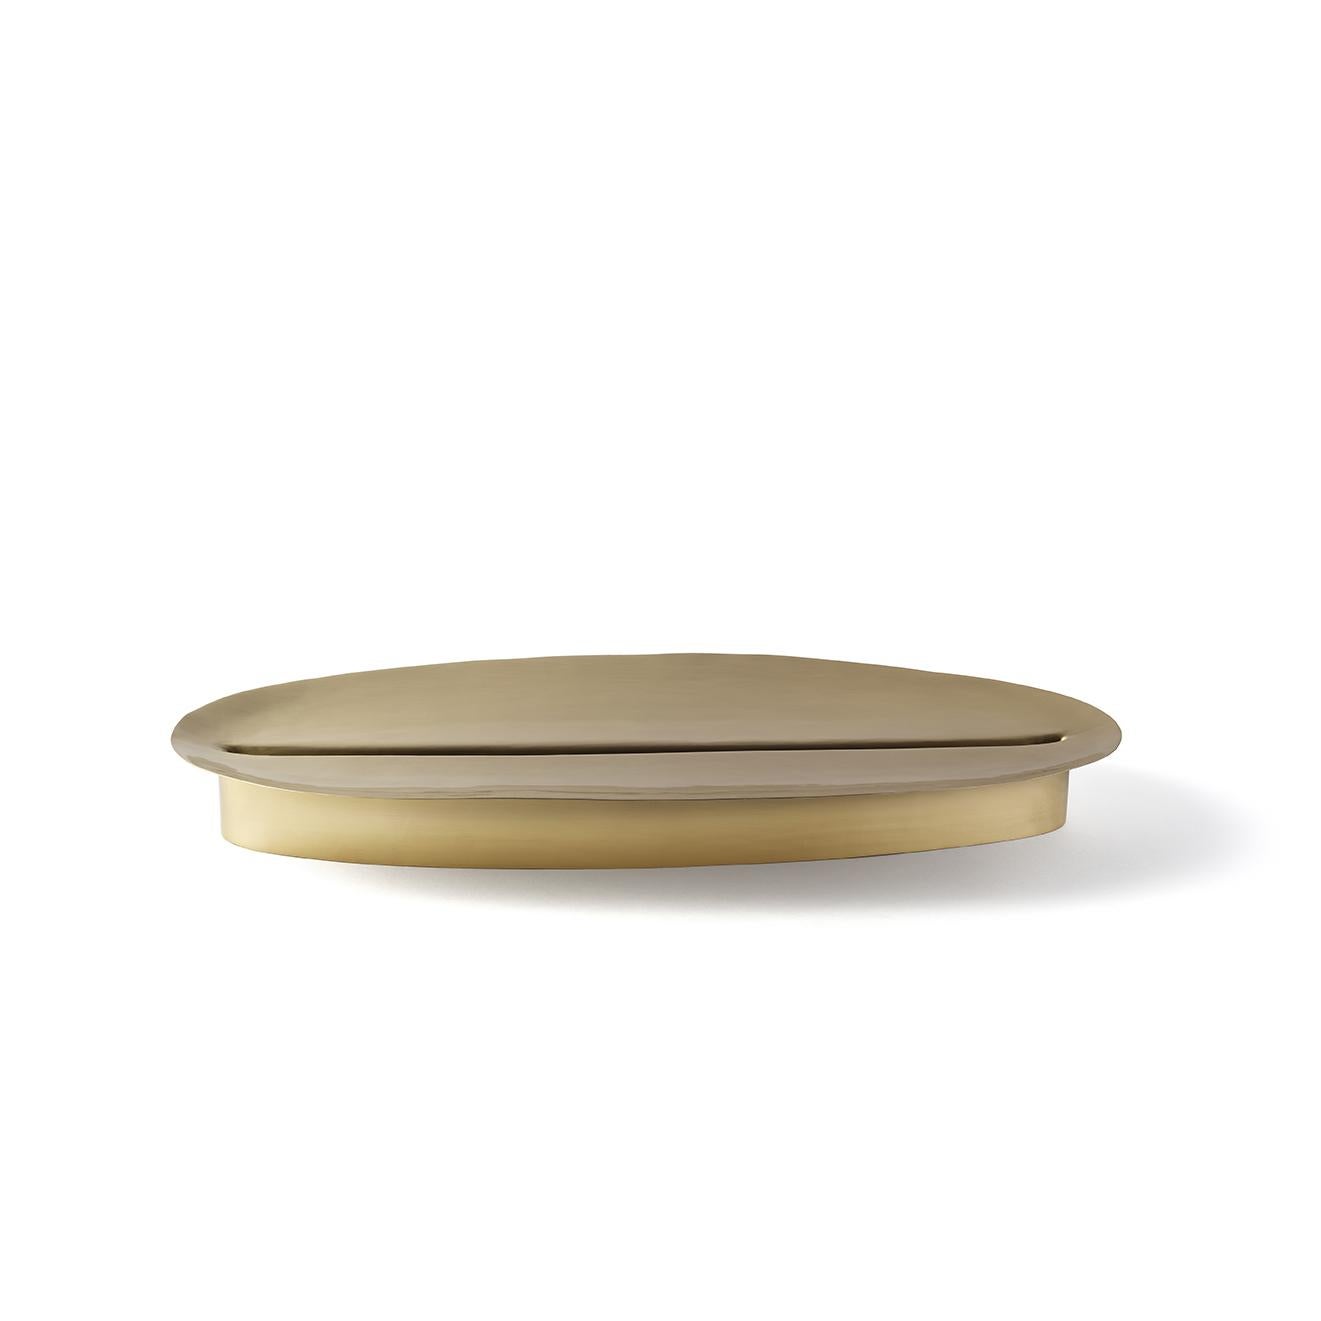 Adspera is a centerpiece in brass designed by Chiara Andreatti for Paola C. and it is part of the collection Coquille, a collection composed of cake stands, centerpieces, fruit bowls and vases, inspired by natural shapes that recall stylized shells.